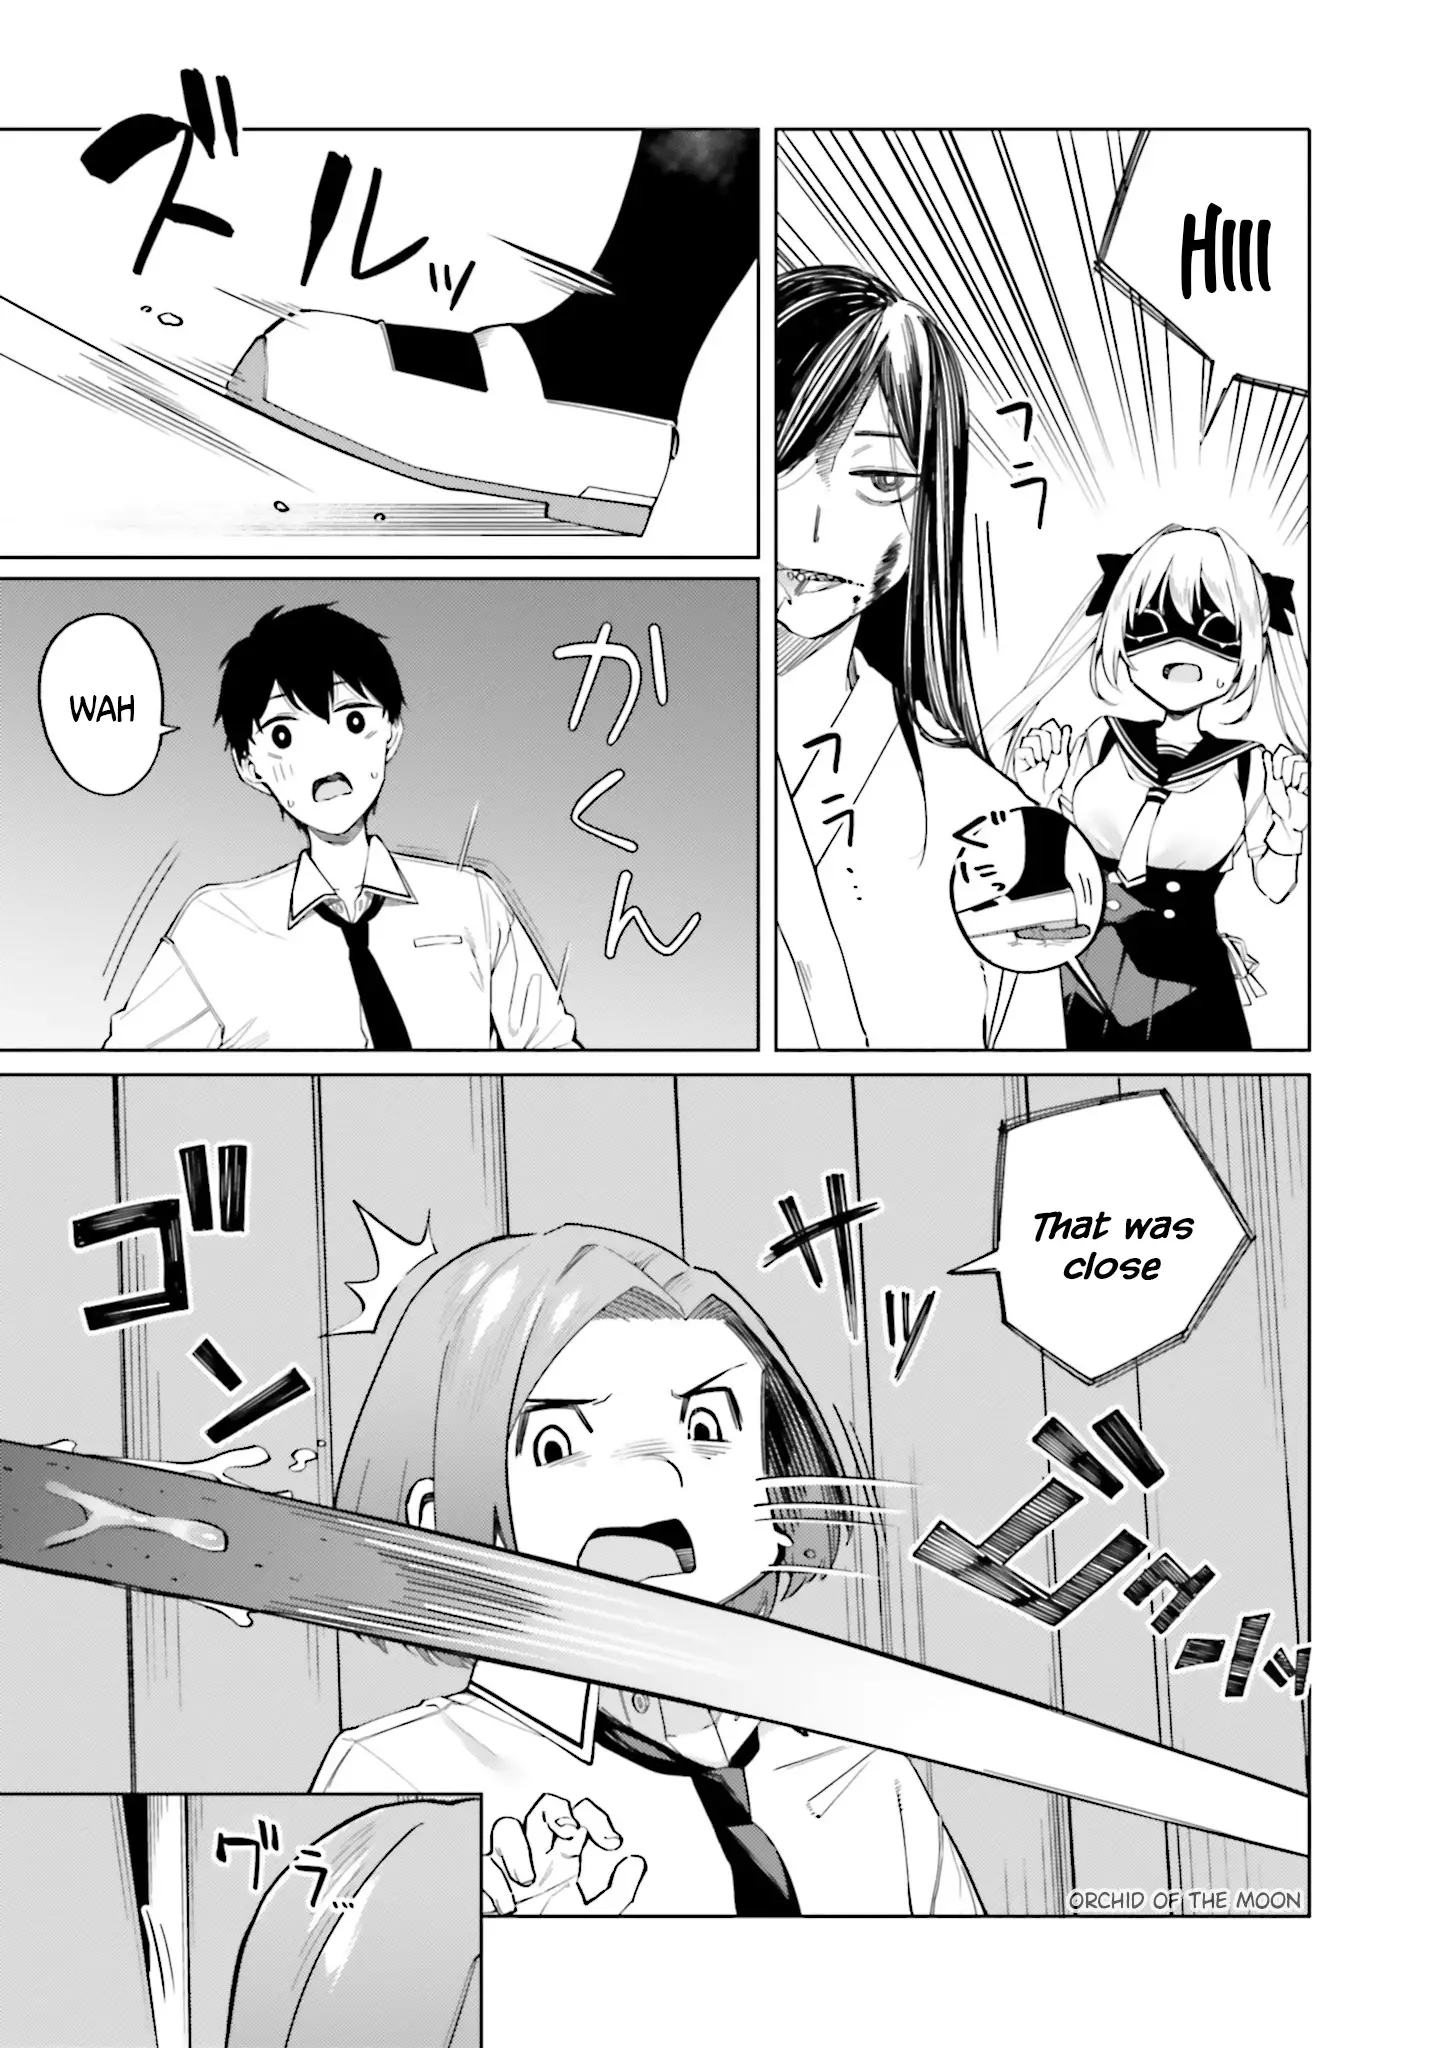 I Don't Understand Shirogane-San's Facial Expression At All - 12 page 14-ec46e569